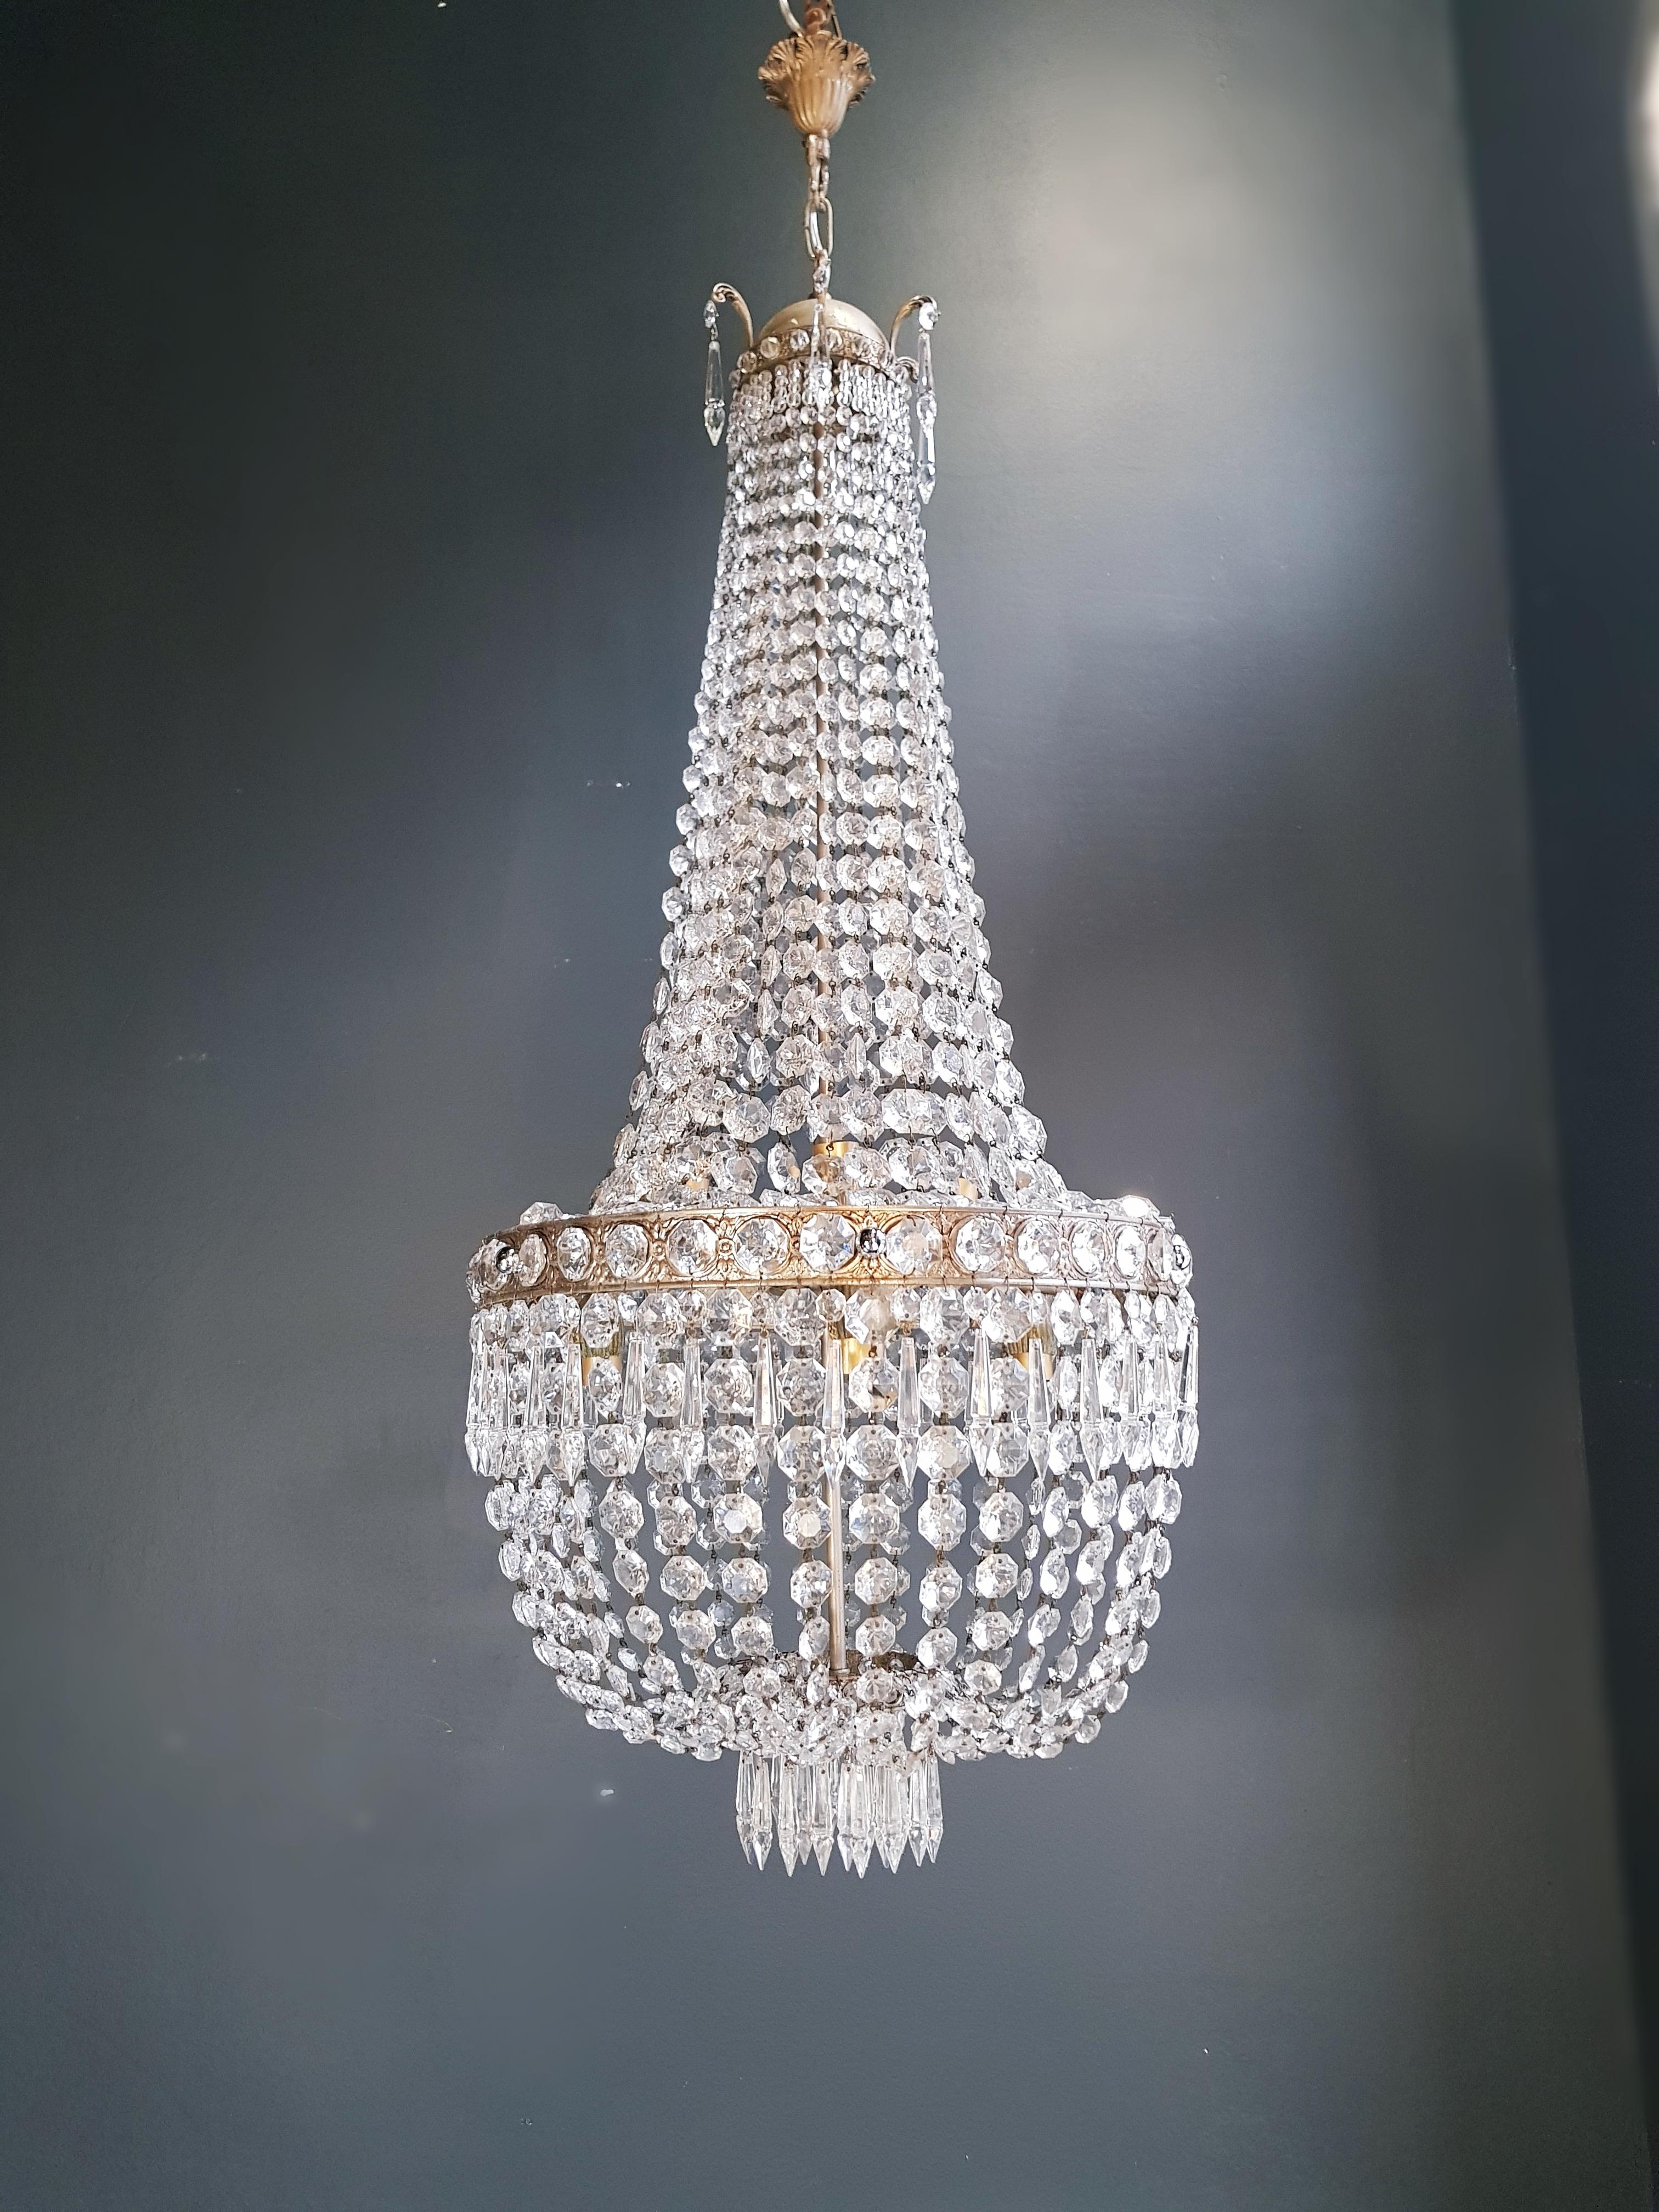 Brass Montgolfièr Empire Sac a Pearl Chandelier Crystal Ceiling Lamp Pendant Lighting